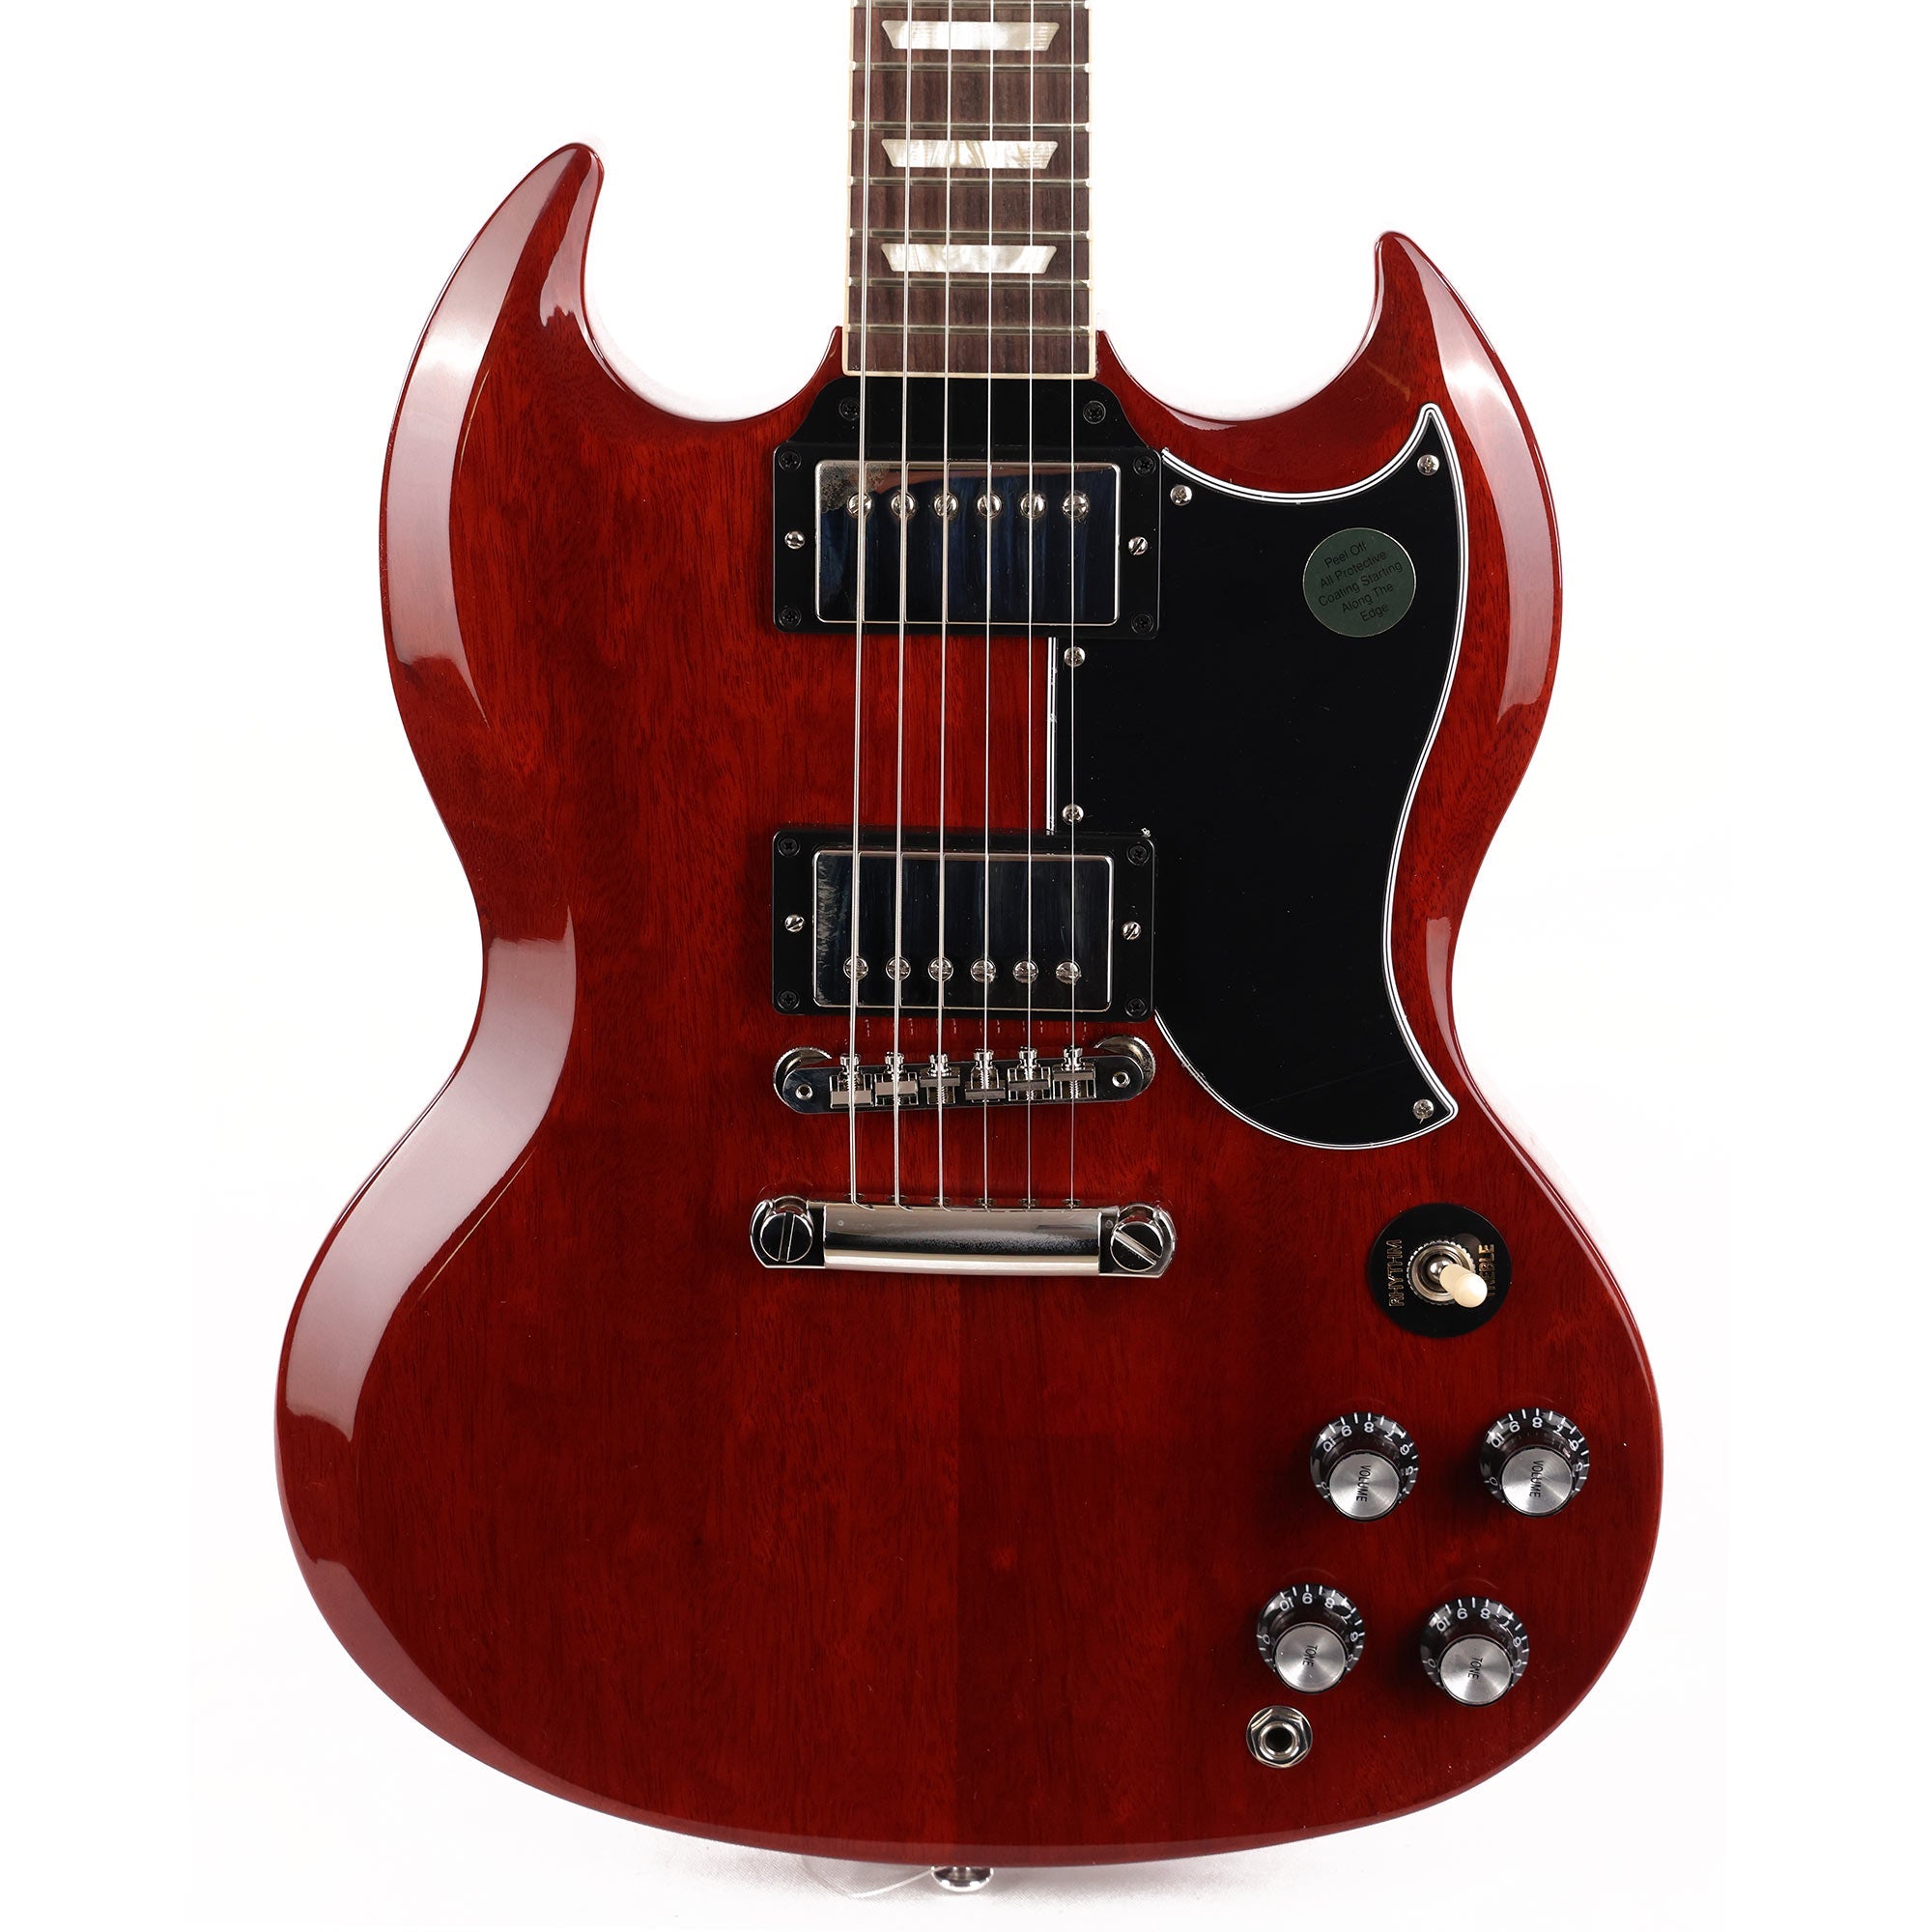 Gibson SG Standard '61 Vintage Cherry | The Music Zoo